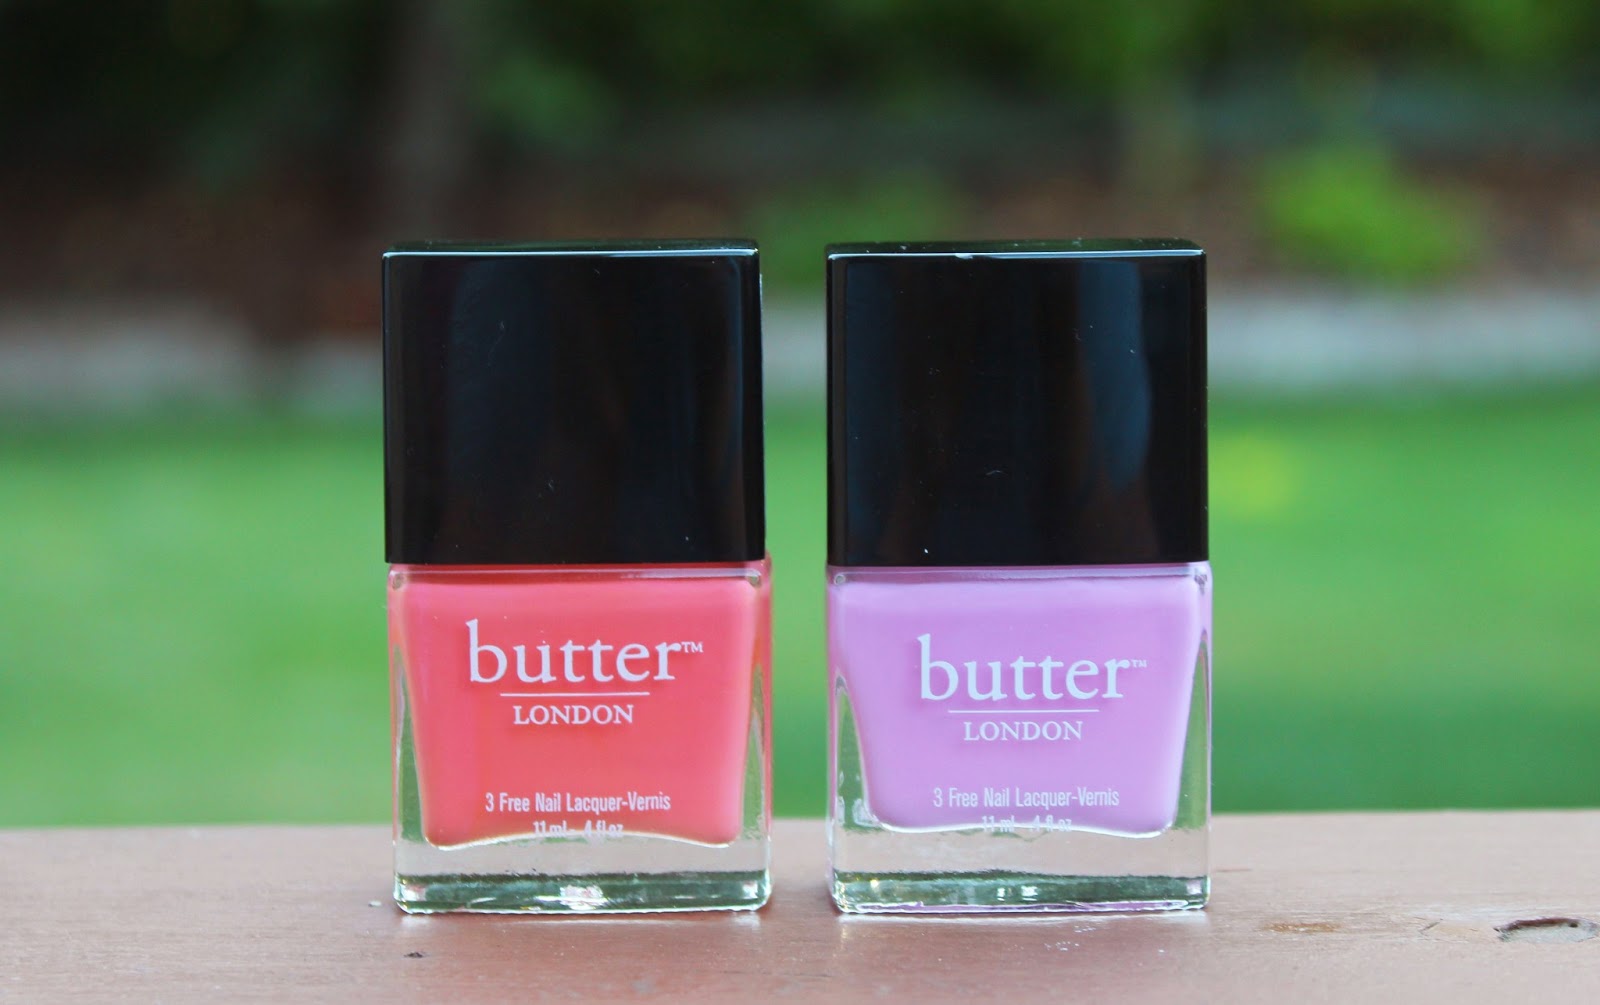 10. Butter London Nail Lacquer in "Jelly Apple" - wide 11